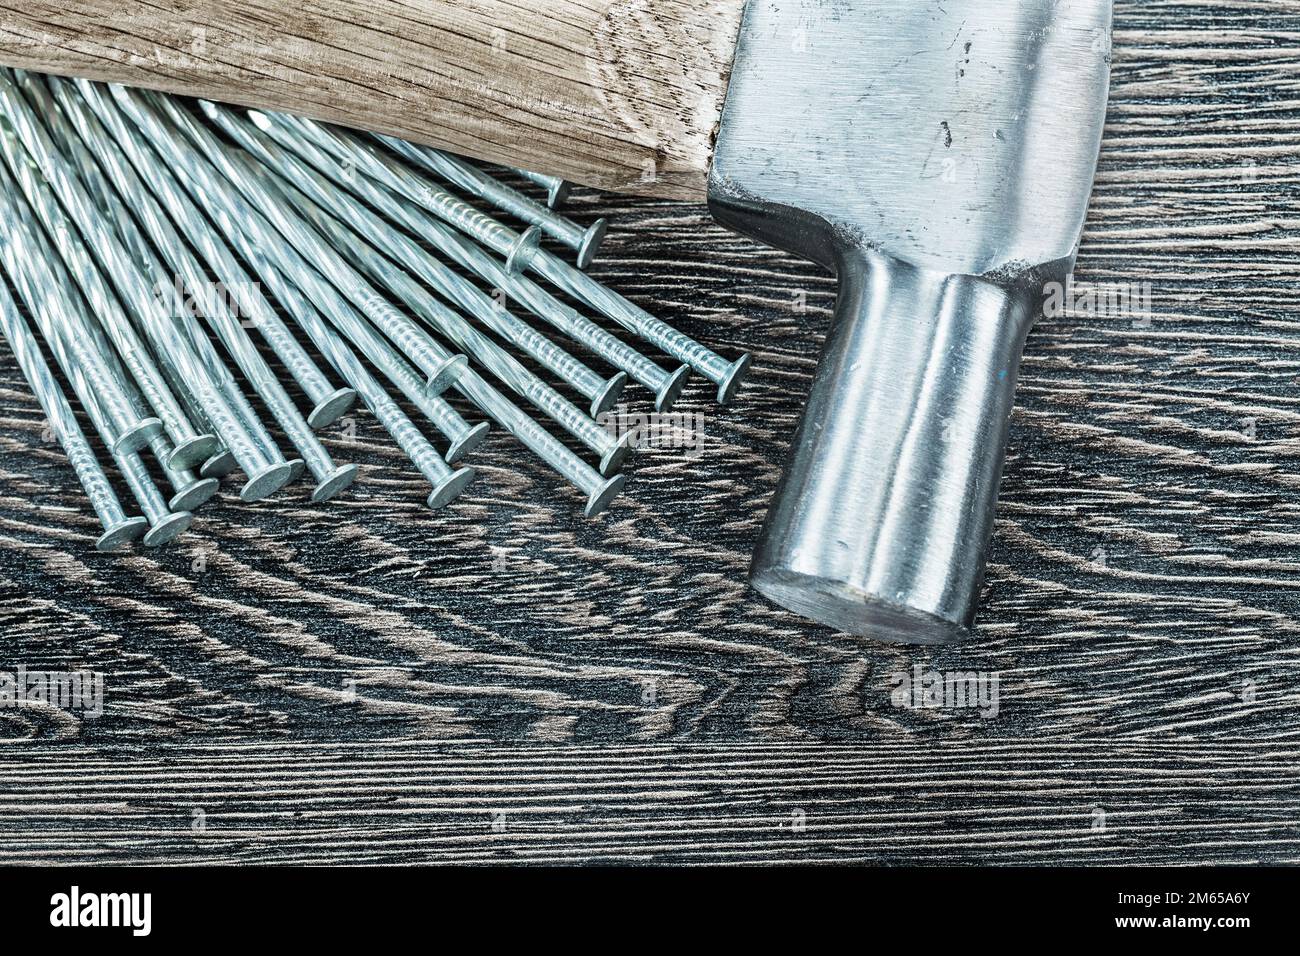 Pile of construction nails claw hammer on wooden board. Stock Photo